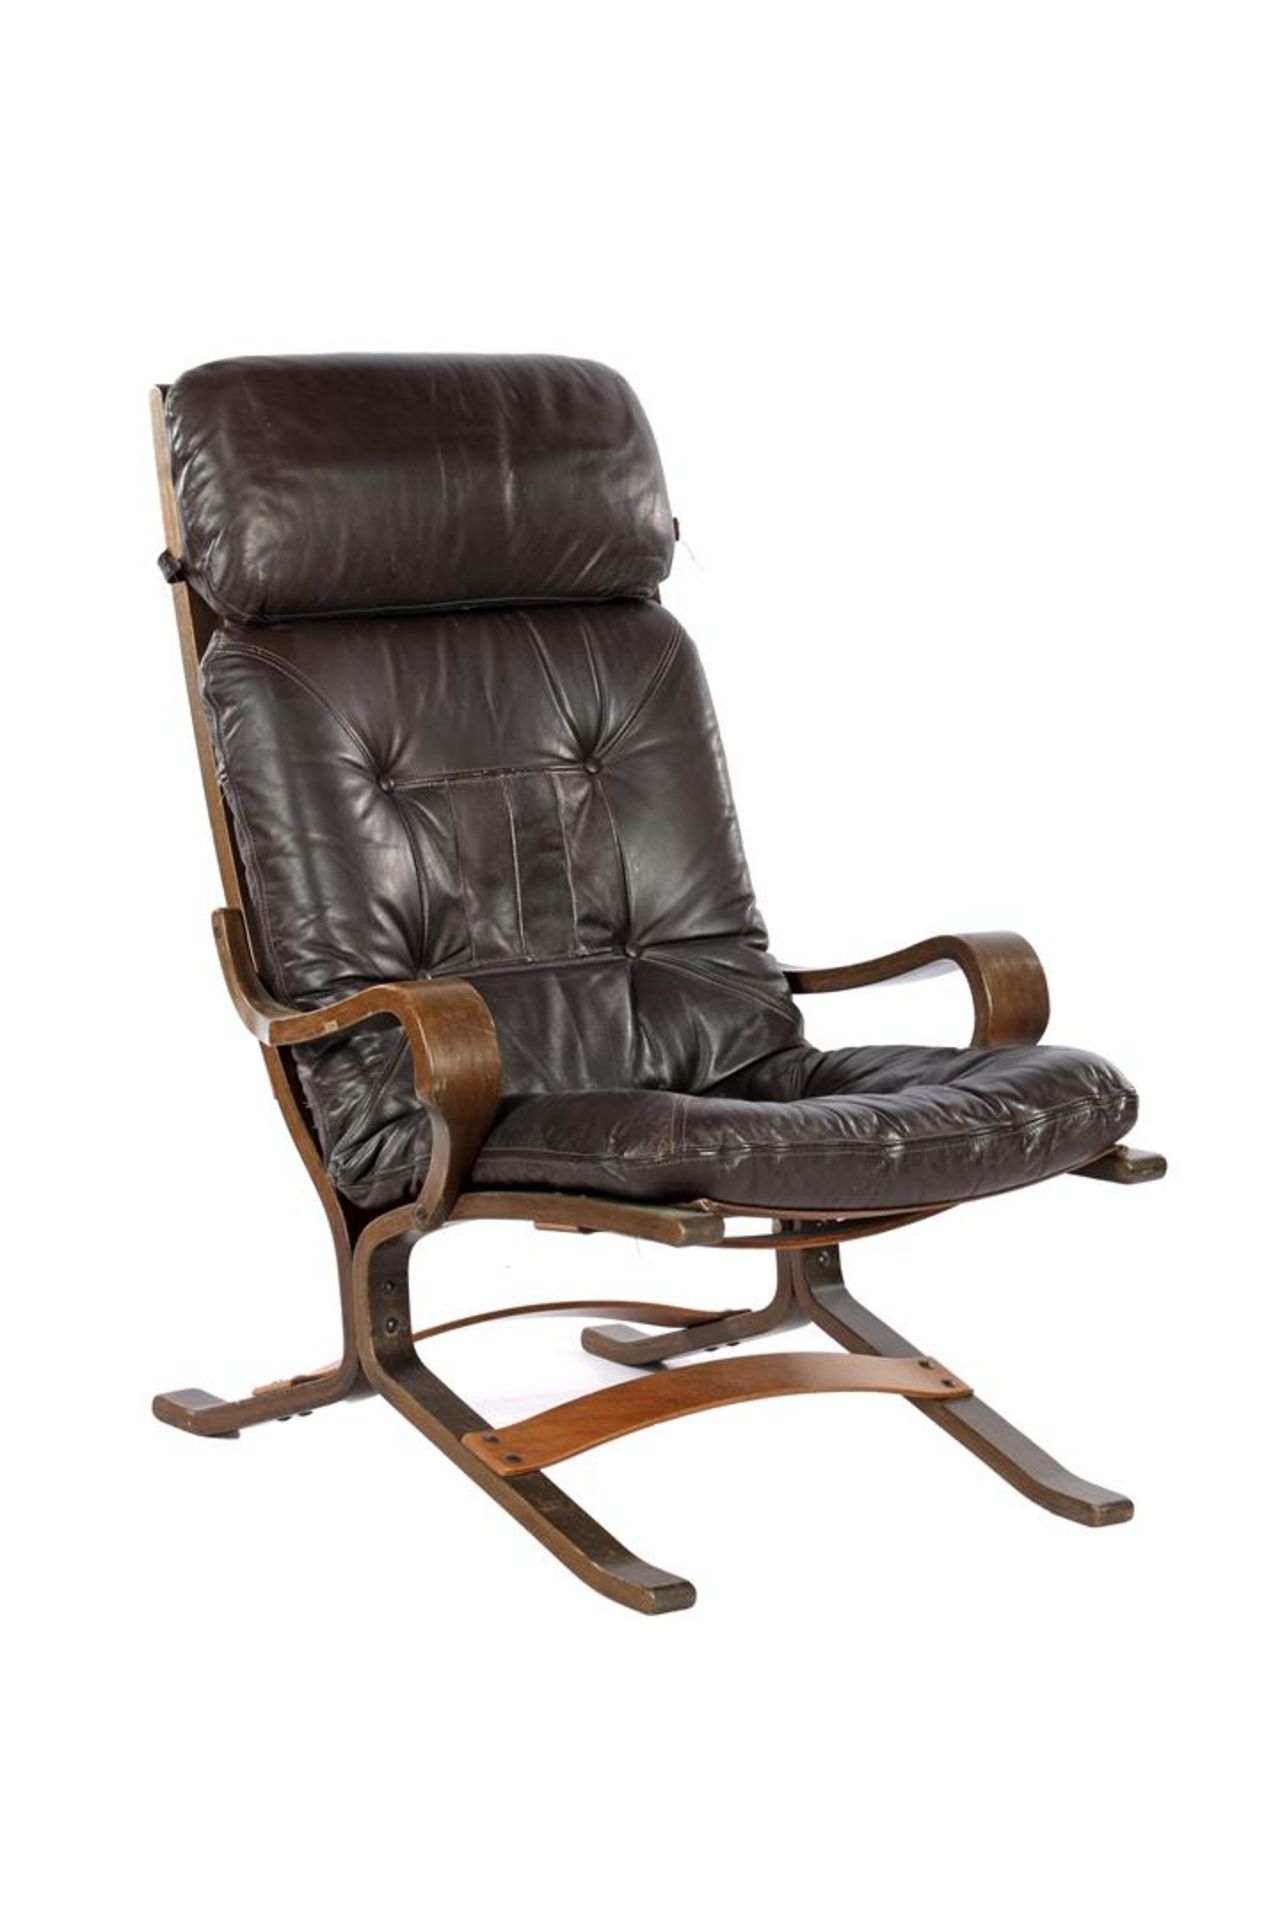 Ingmar Relling (1920-2002) Curved plywood recliner